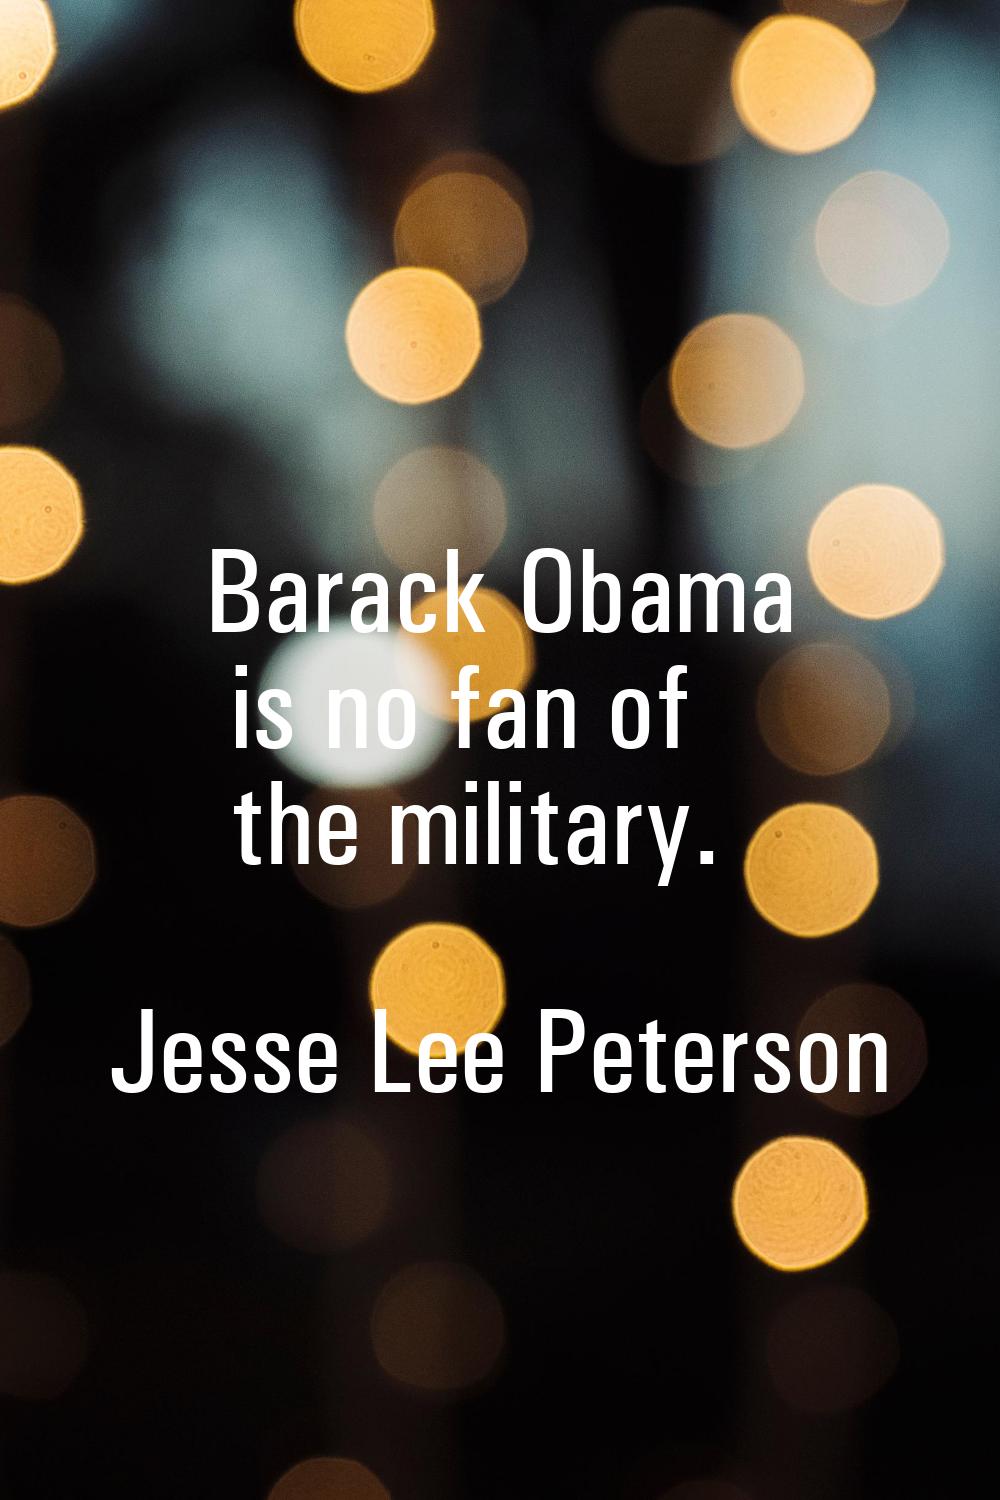 Barack Obama is no fan of the military.